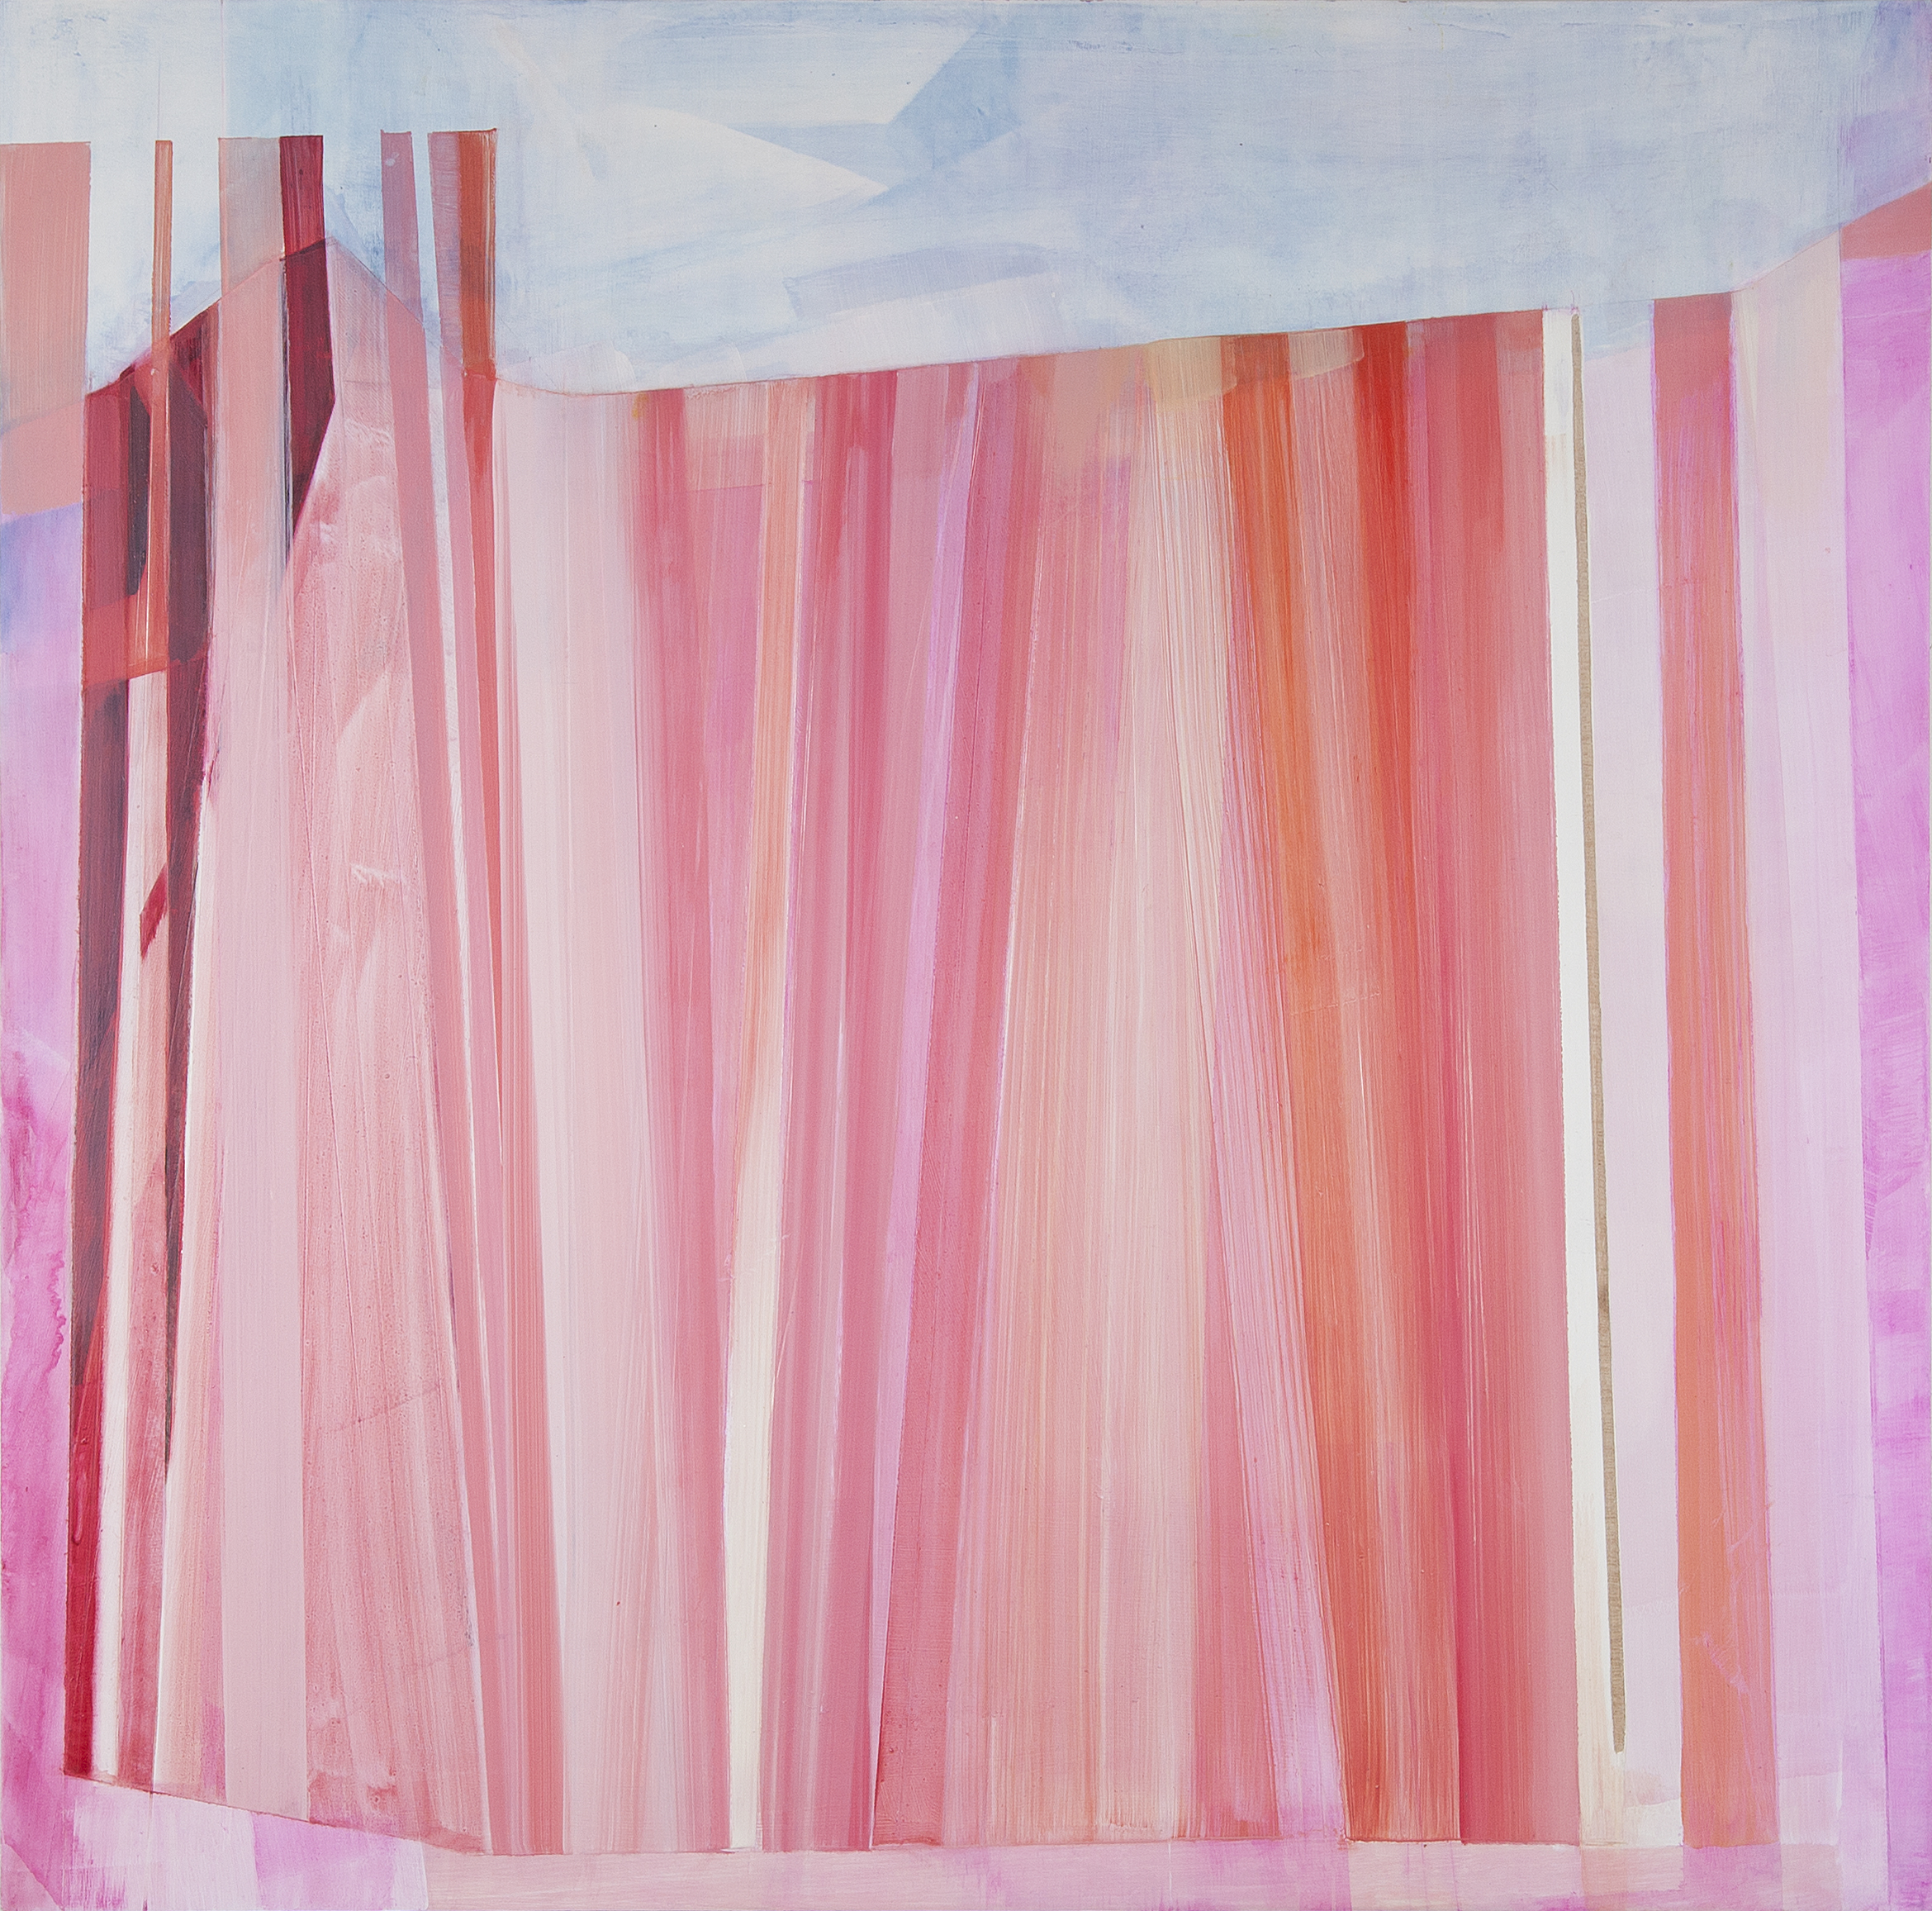 Untitled (pink), 2013